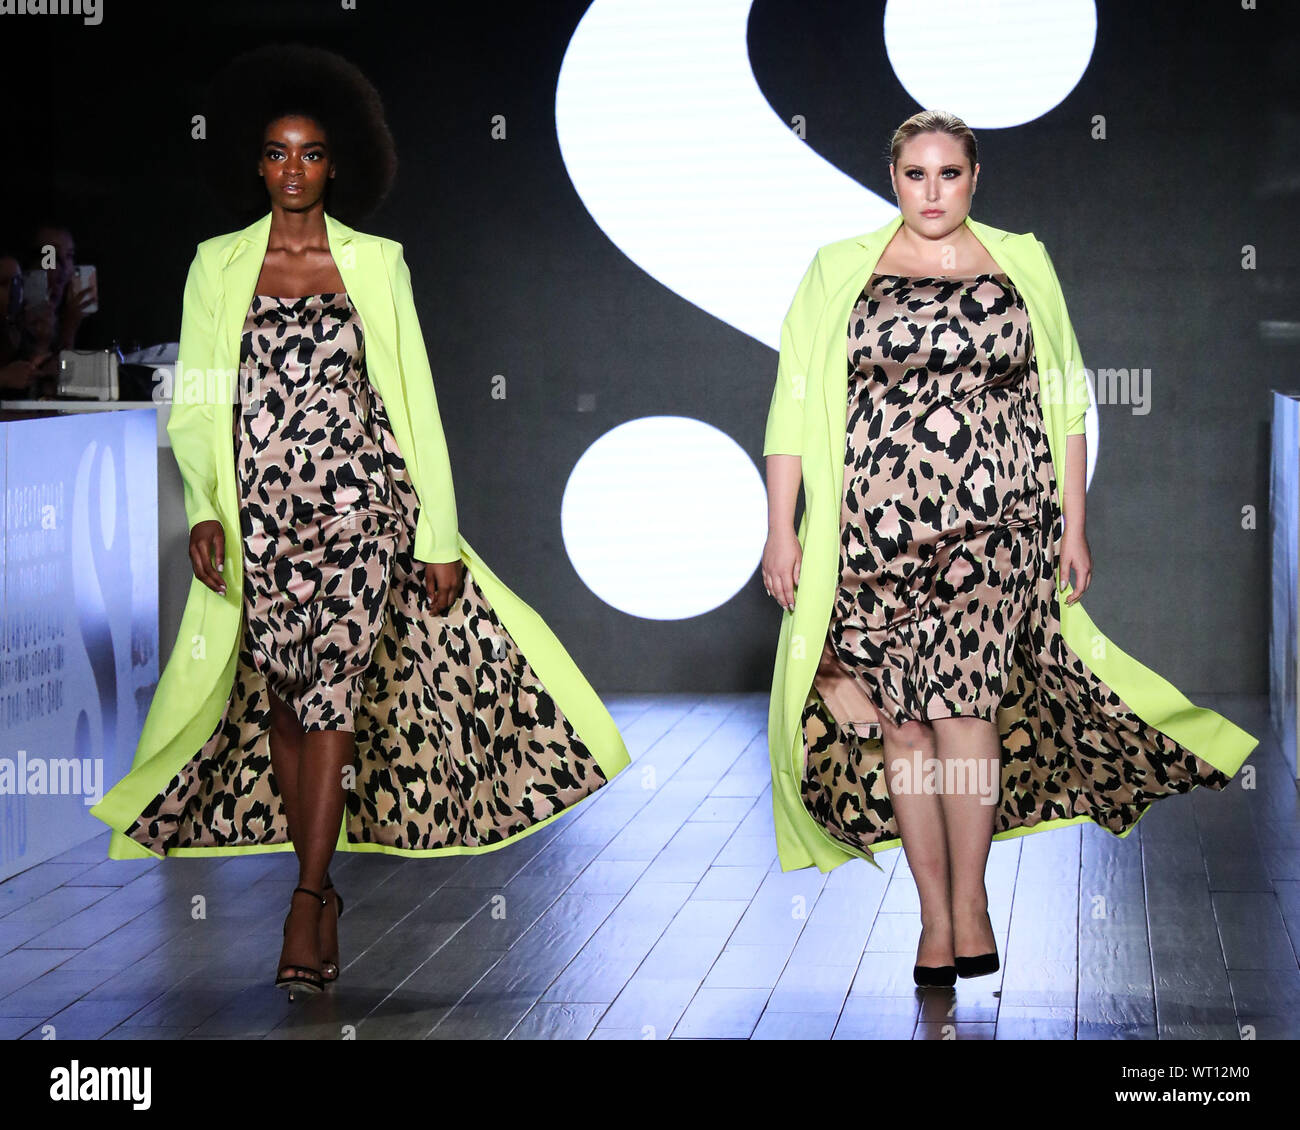 New York City, United States. 10th Sep, 2019. MANHATTAN, NEW YORK CITY, NEW YORK, USA - SEPTEMBER 10: Hayley Hasselhoff walks the runway at S by Serena Williams during New York Fashion Week: The Shows held at Metropolitan West on September 10, 2019 in Manhattan, New York City, New York, United States. (Photo by Xavier Collin/Image Press Agency) Credit: Image Press Agency/Alamy Live News Stock Photo